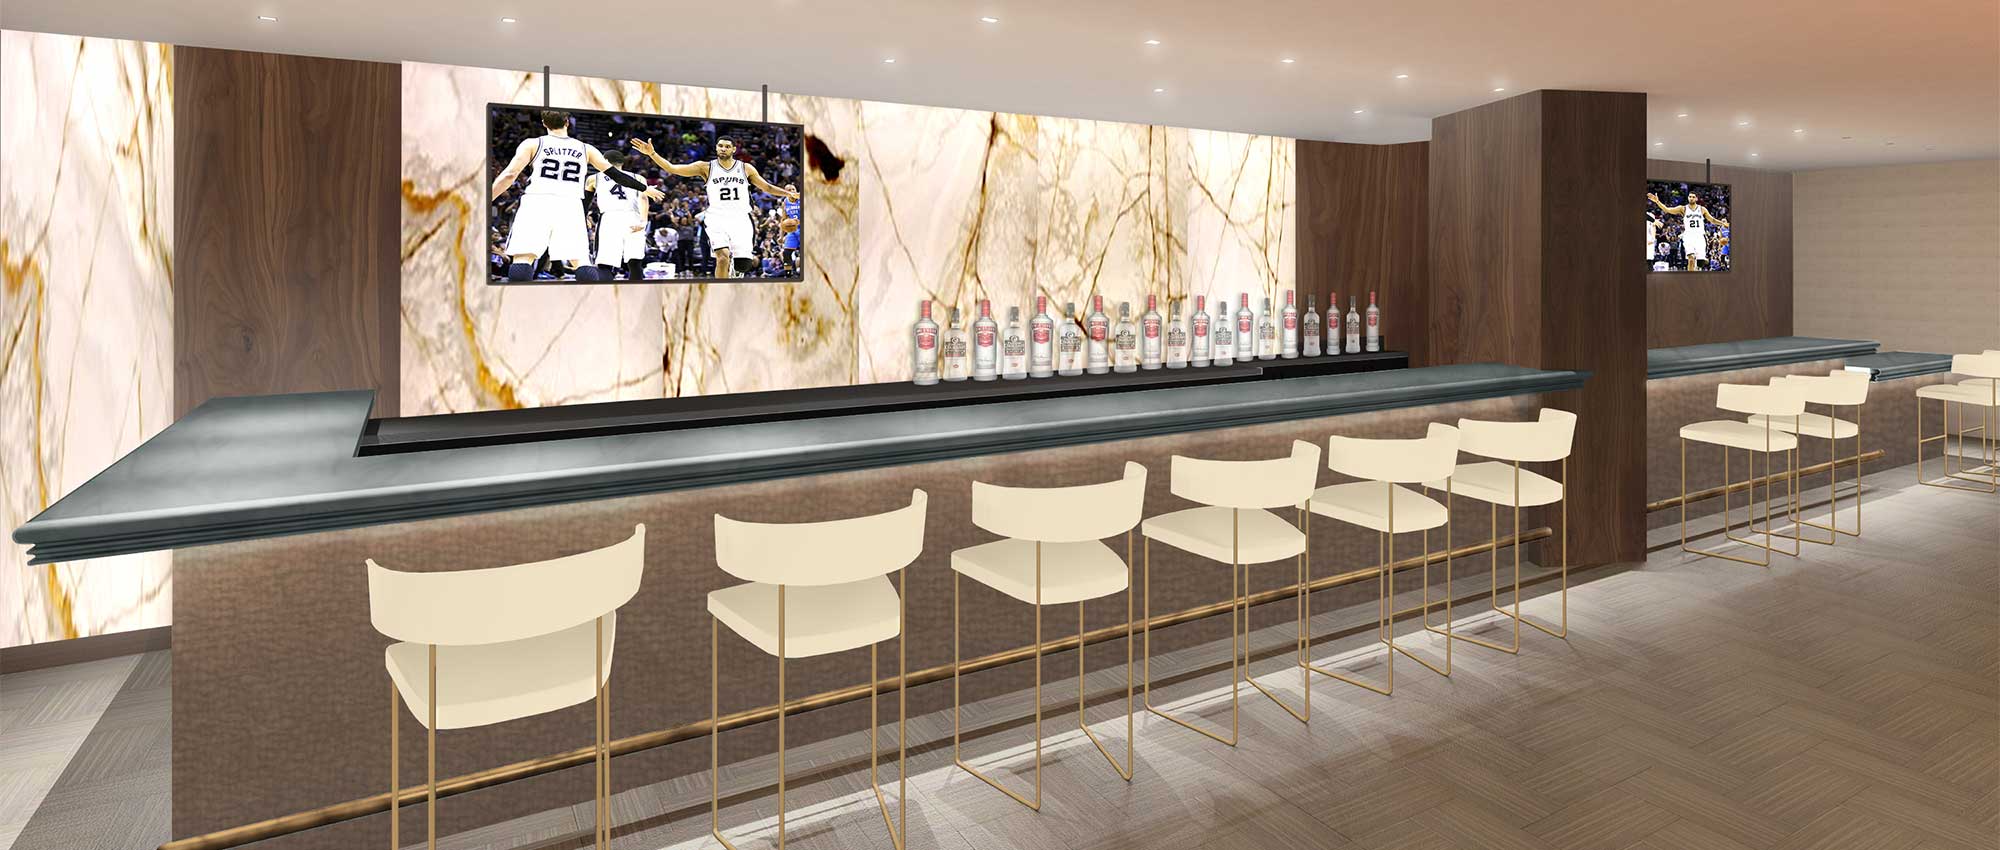 More leaked photos of AT&T Center renovations surface online from San  Antonio Spurs fan